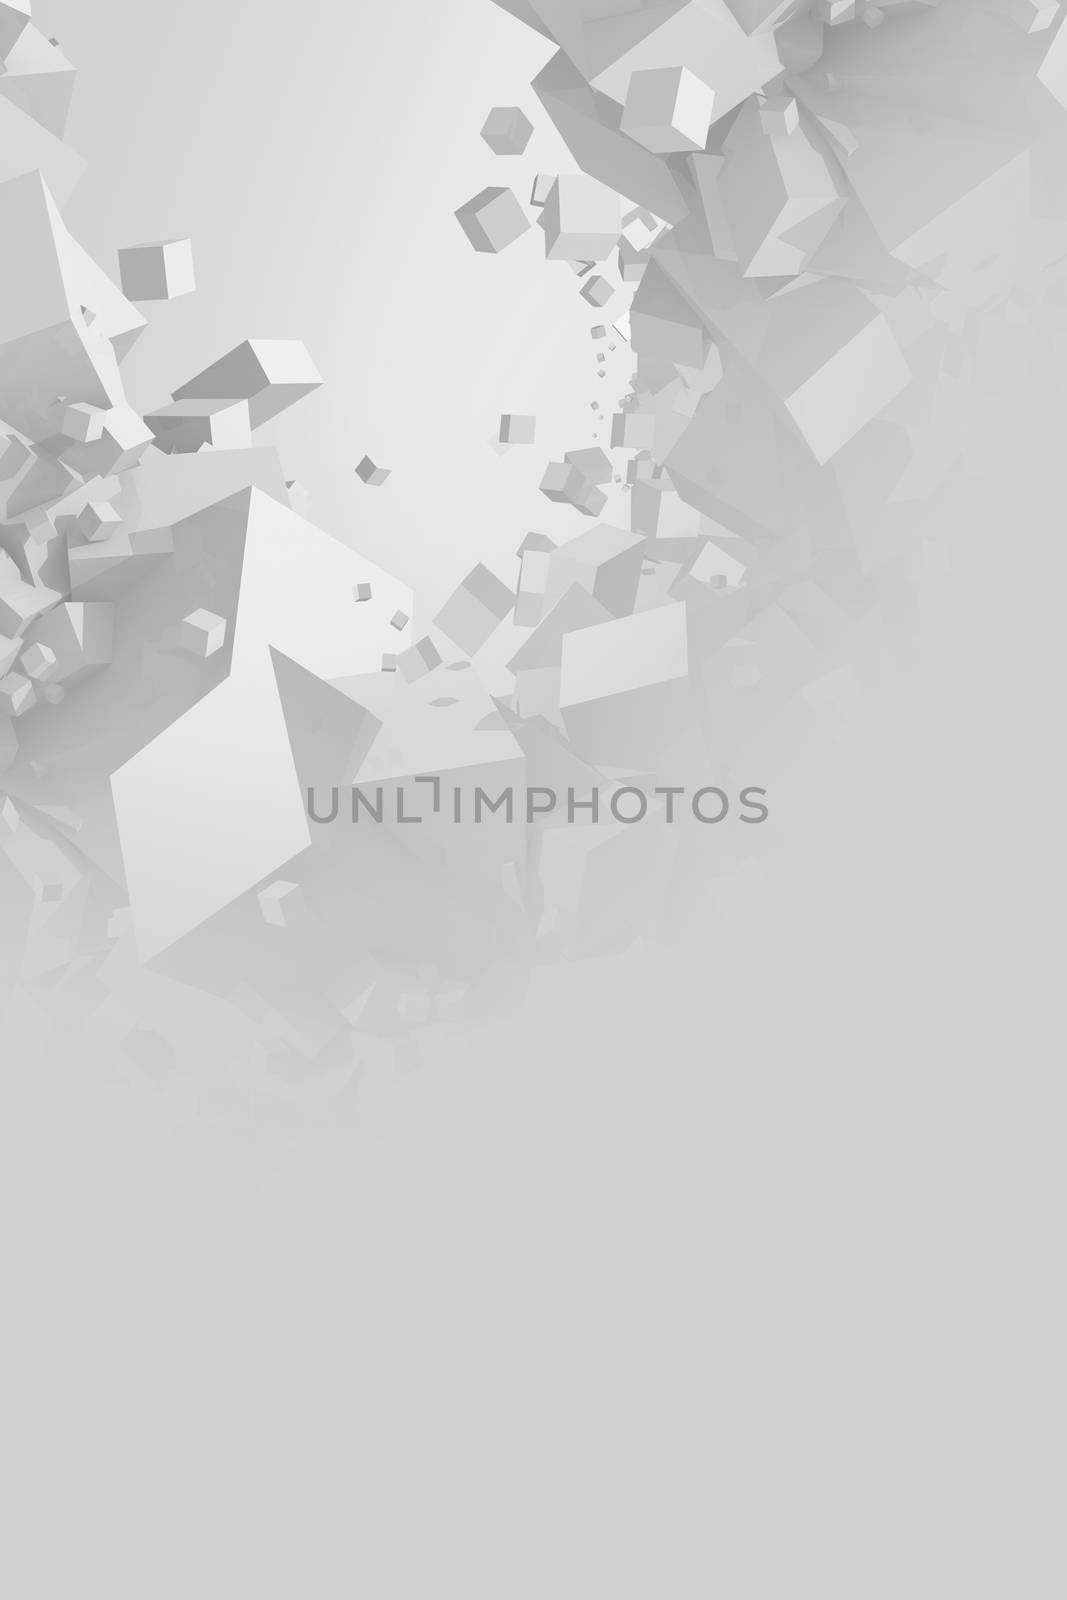 Abstract Gray Cubes Background. Cubes Explosion Concept Background.